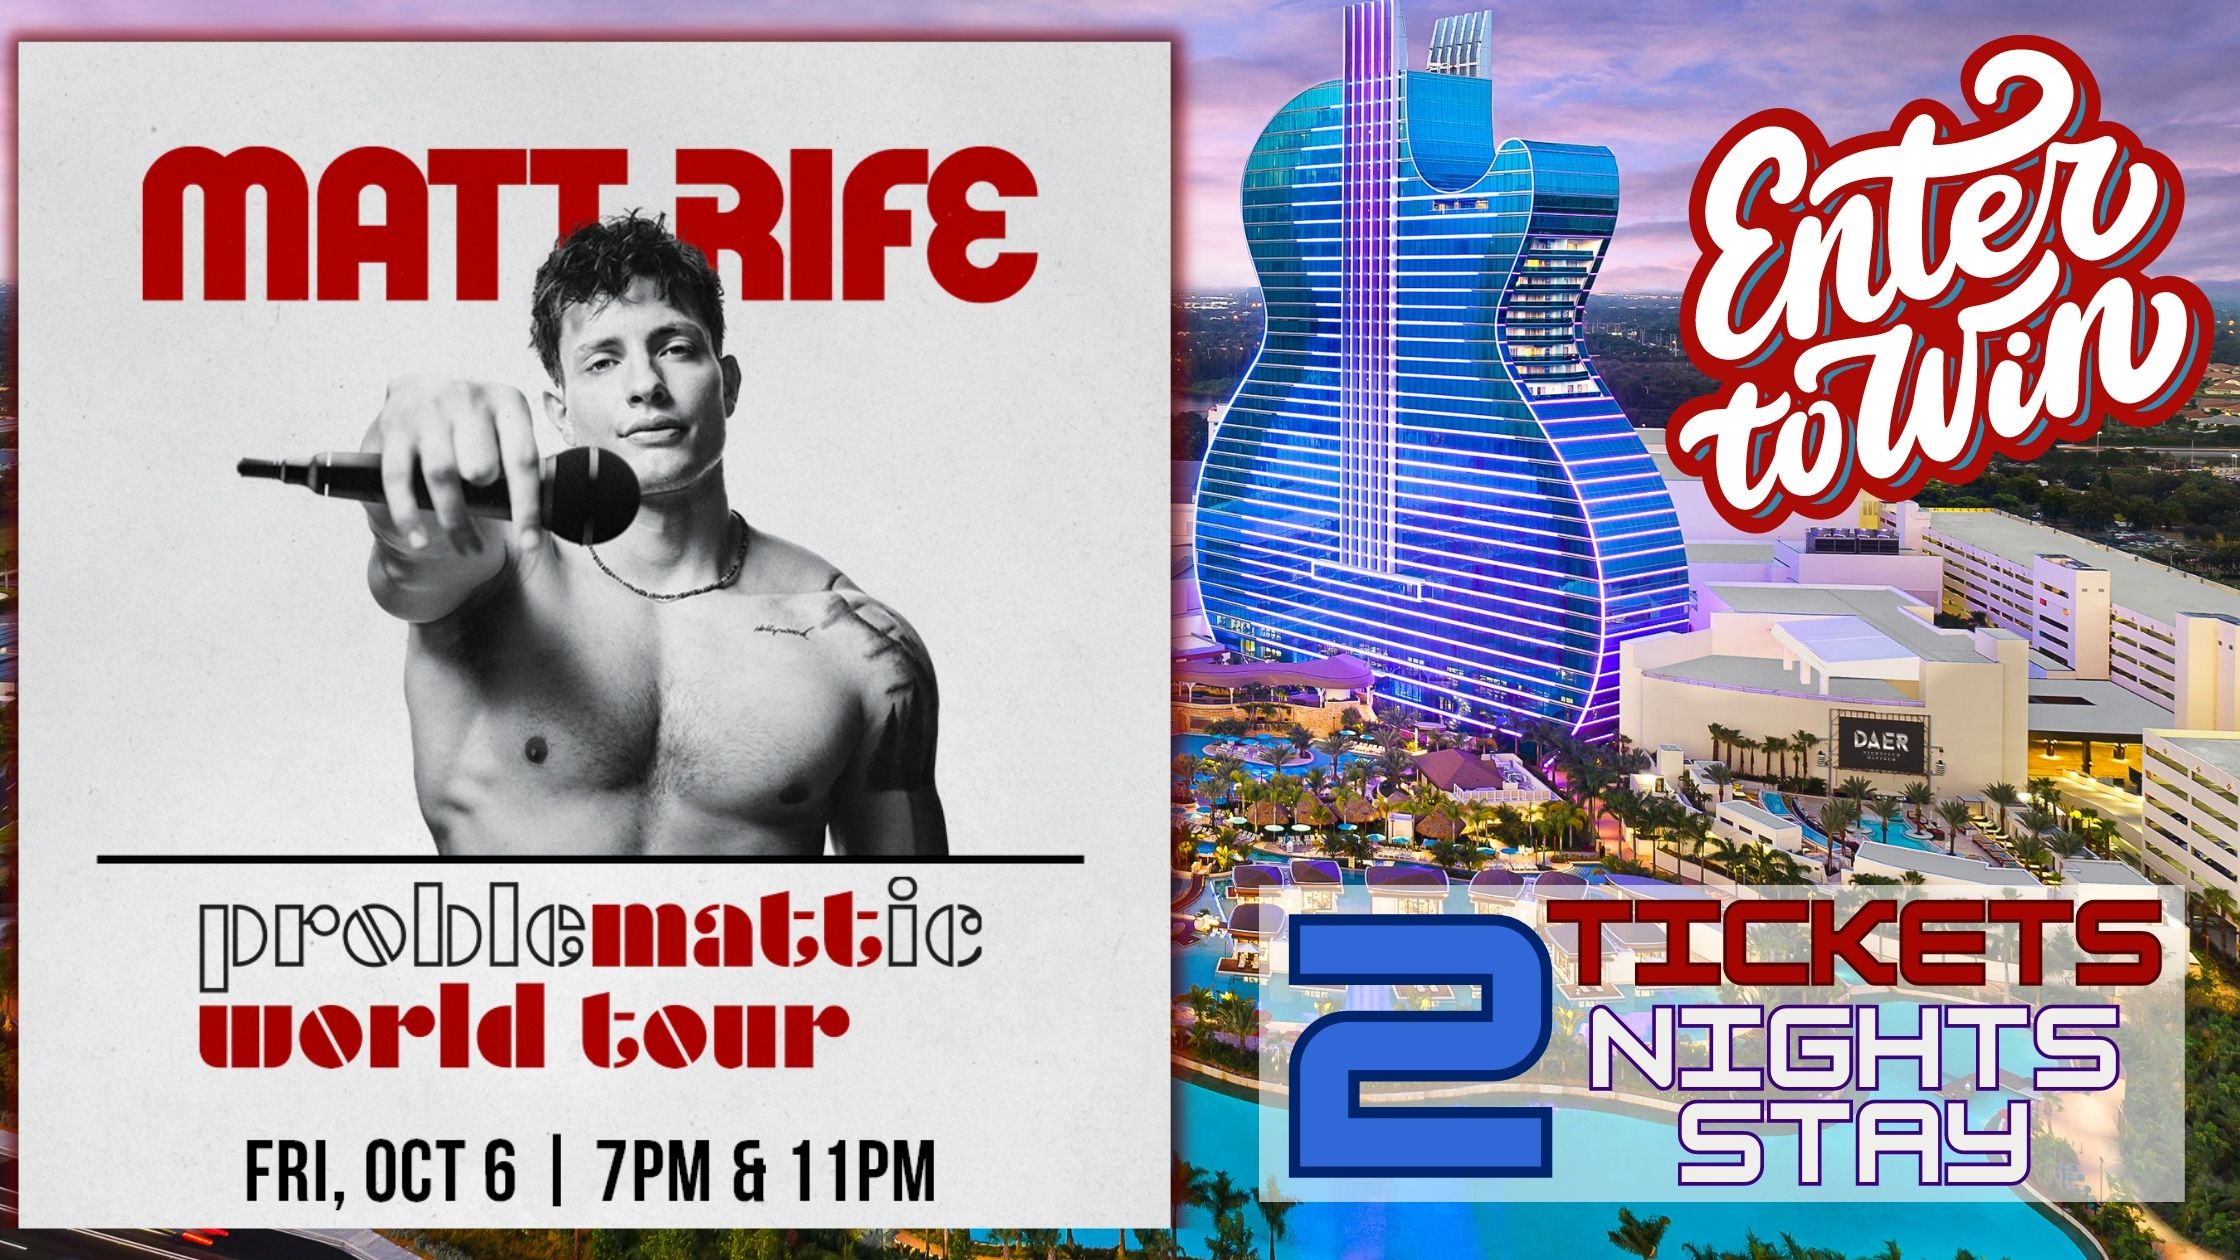 Matt Rife Tickets Giveaway Contest at Guitar Hotel The Space Coast Rocket